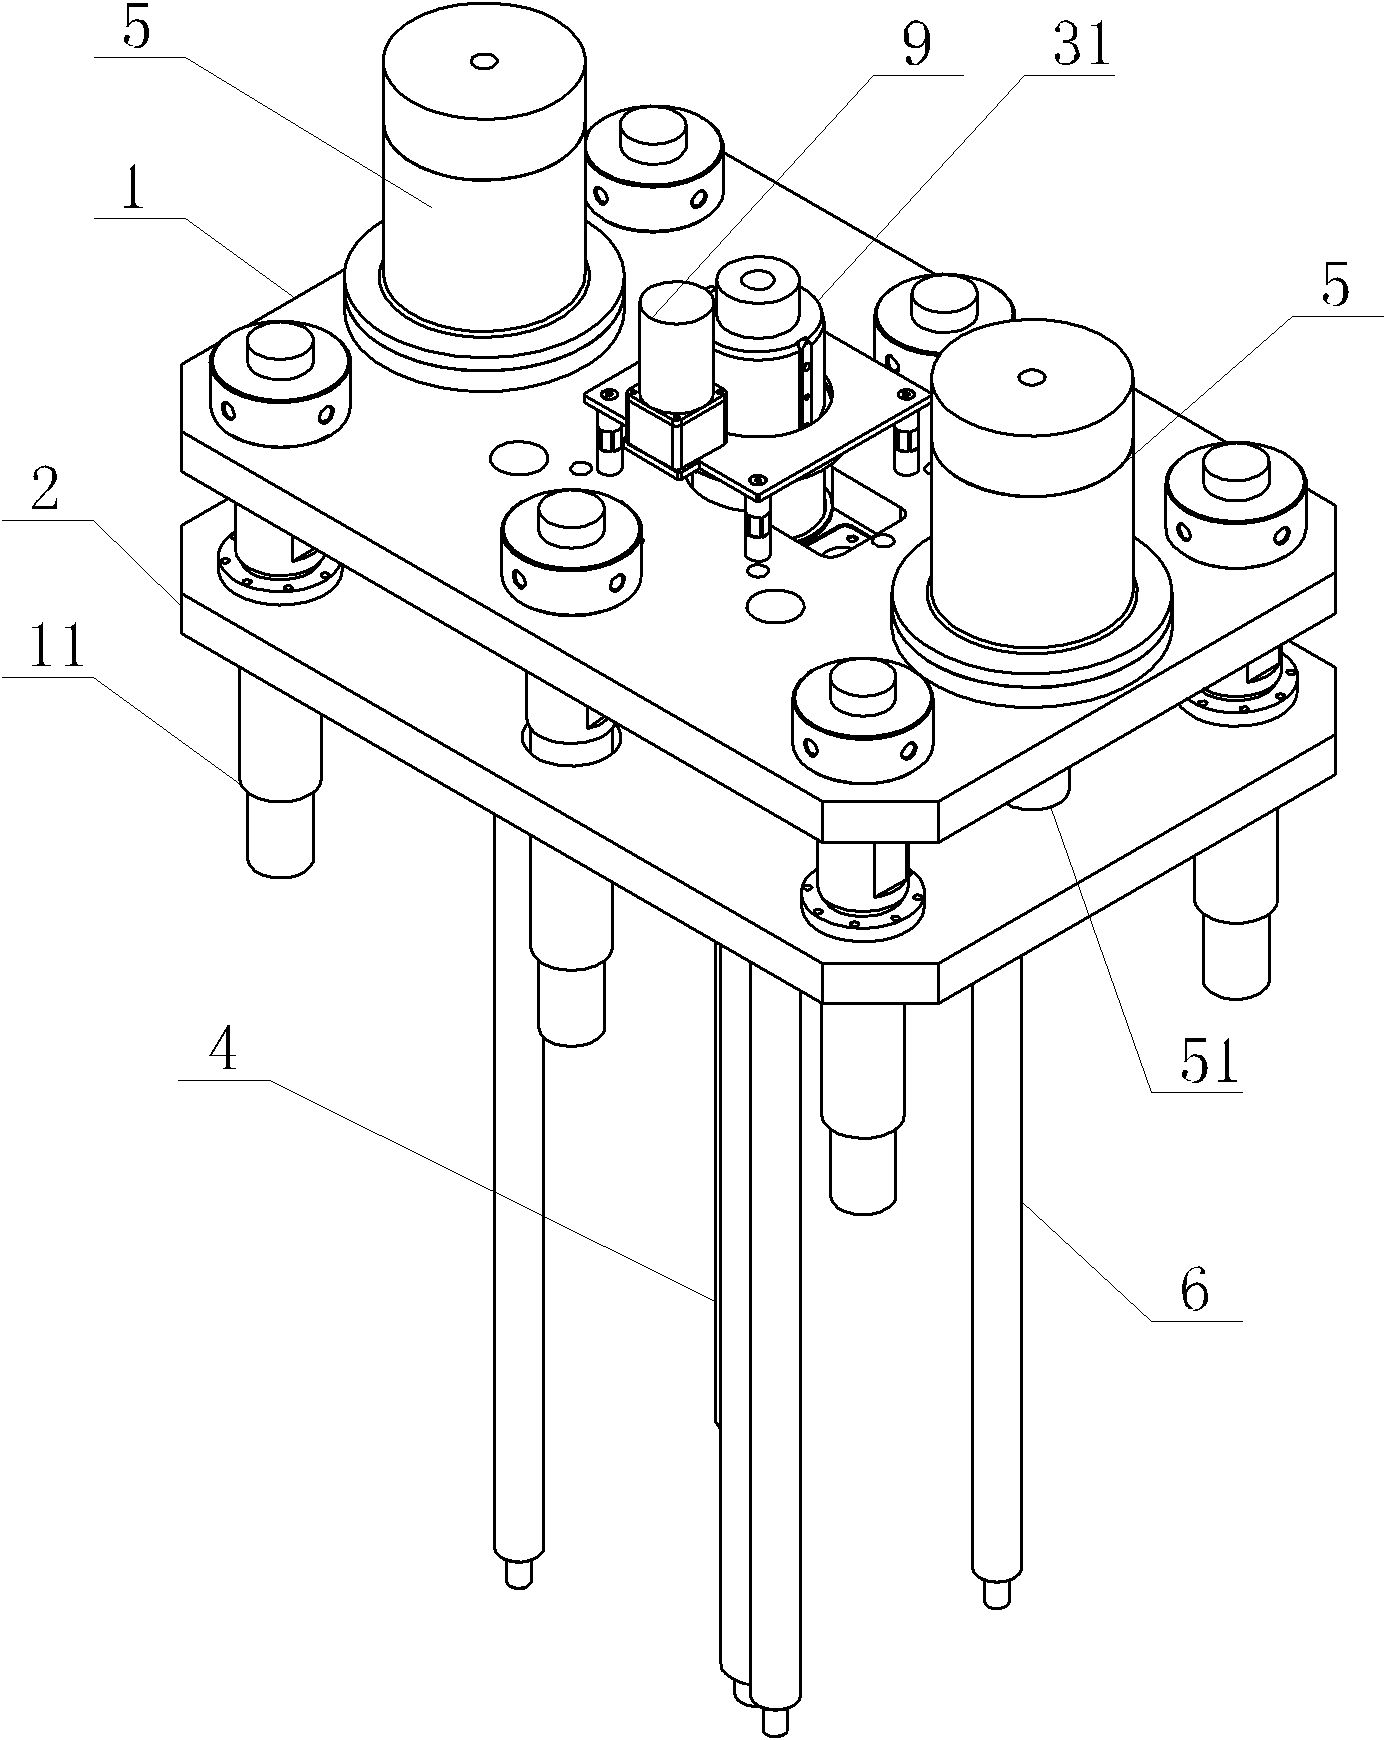 Ejection and secondary extrusion device